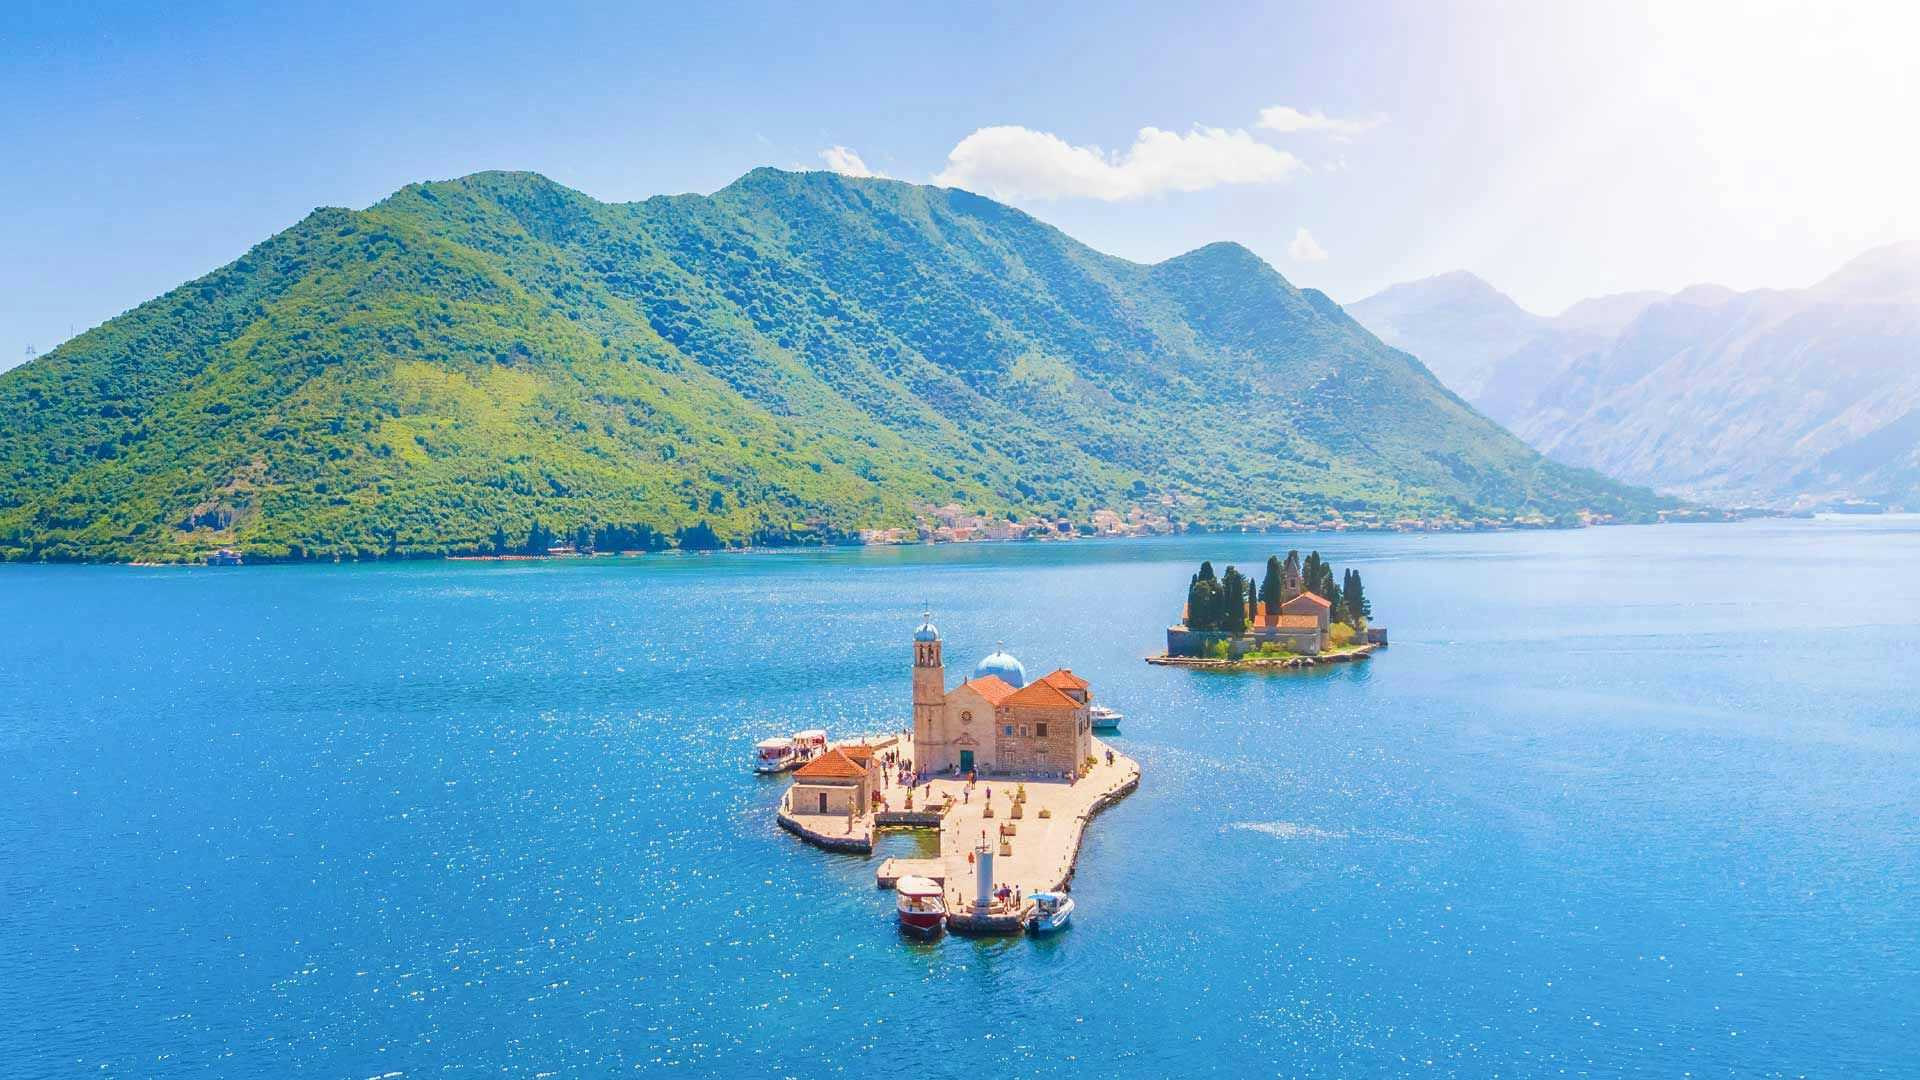 Our lady of the rocks in Montenegro